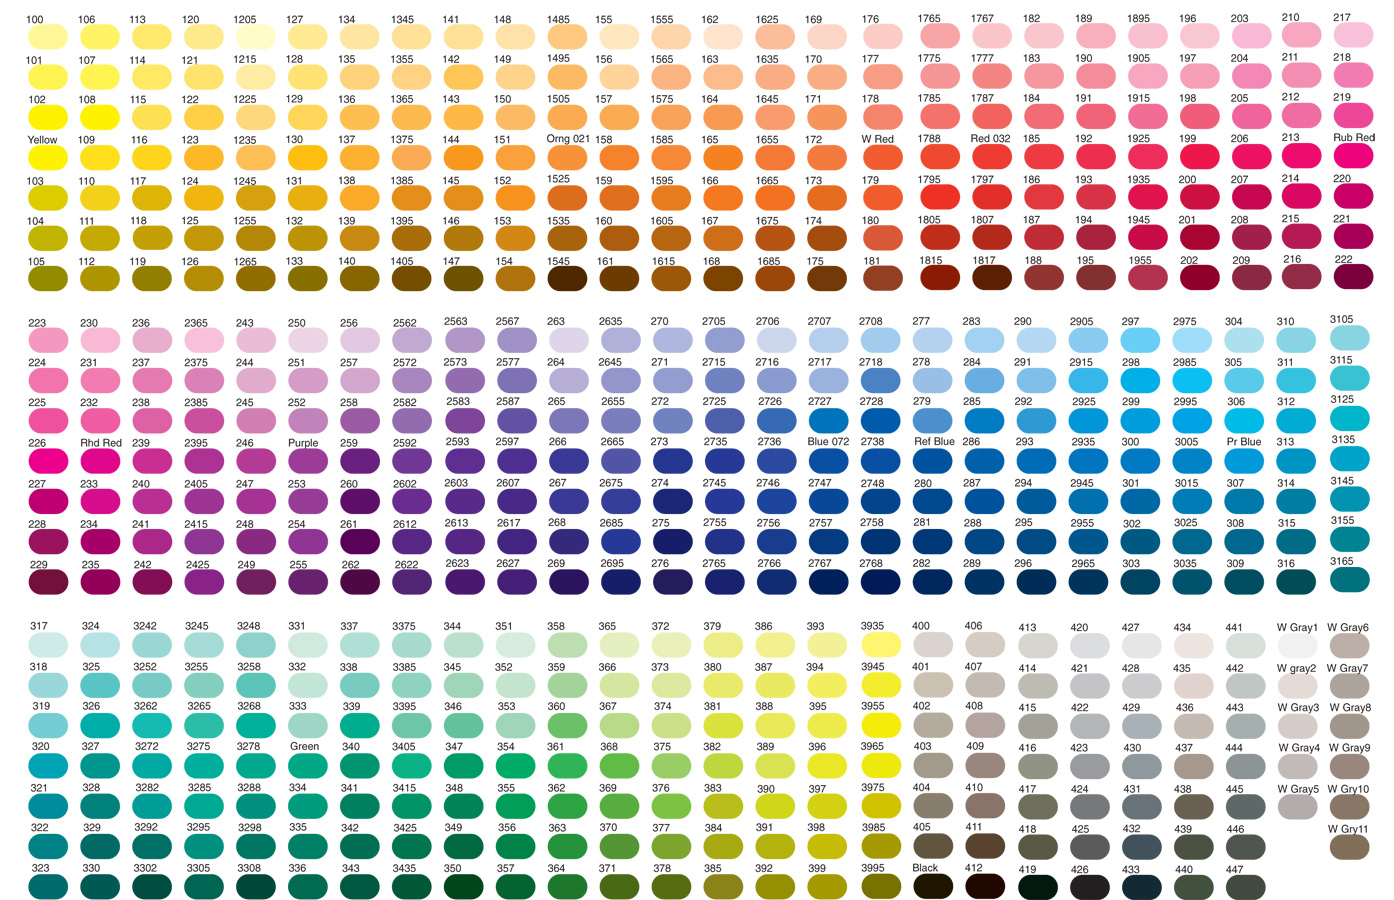 Pantone Color Chart All Colors Moderndesigninterior Com Effy Moom Free Coloring Picture wallpaper give a chance to color on the wall without getting in trouble! Fill the walls of your home or office with stress-relieving [effymoom.blogspot.com]